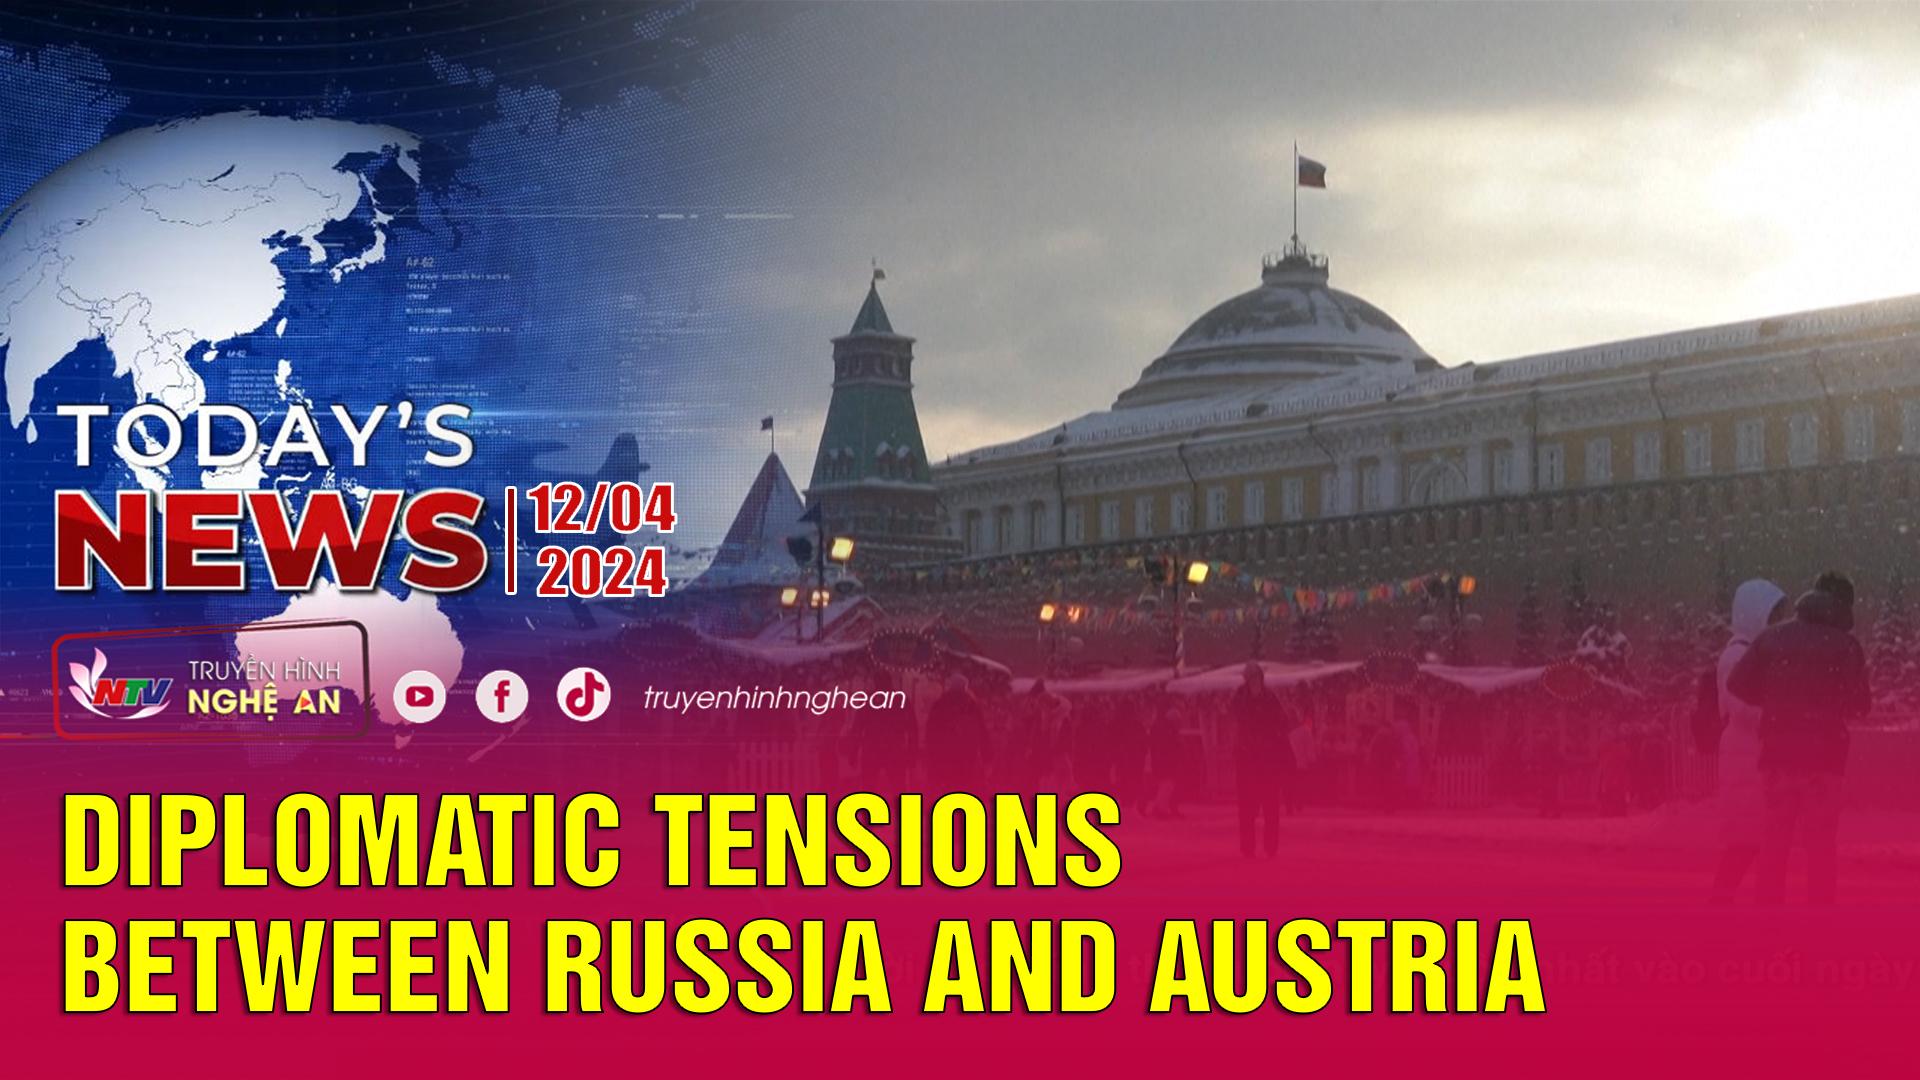 Today's News - 12/04/2024:  Diplomatic tensions between Russia and Austria.